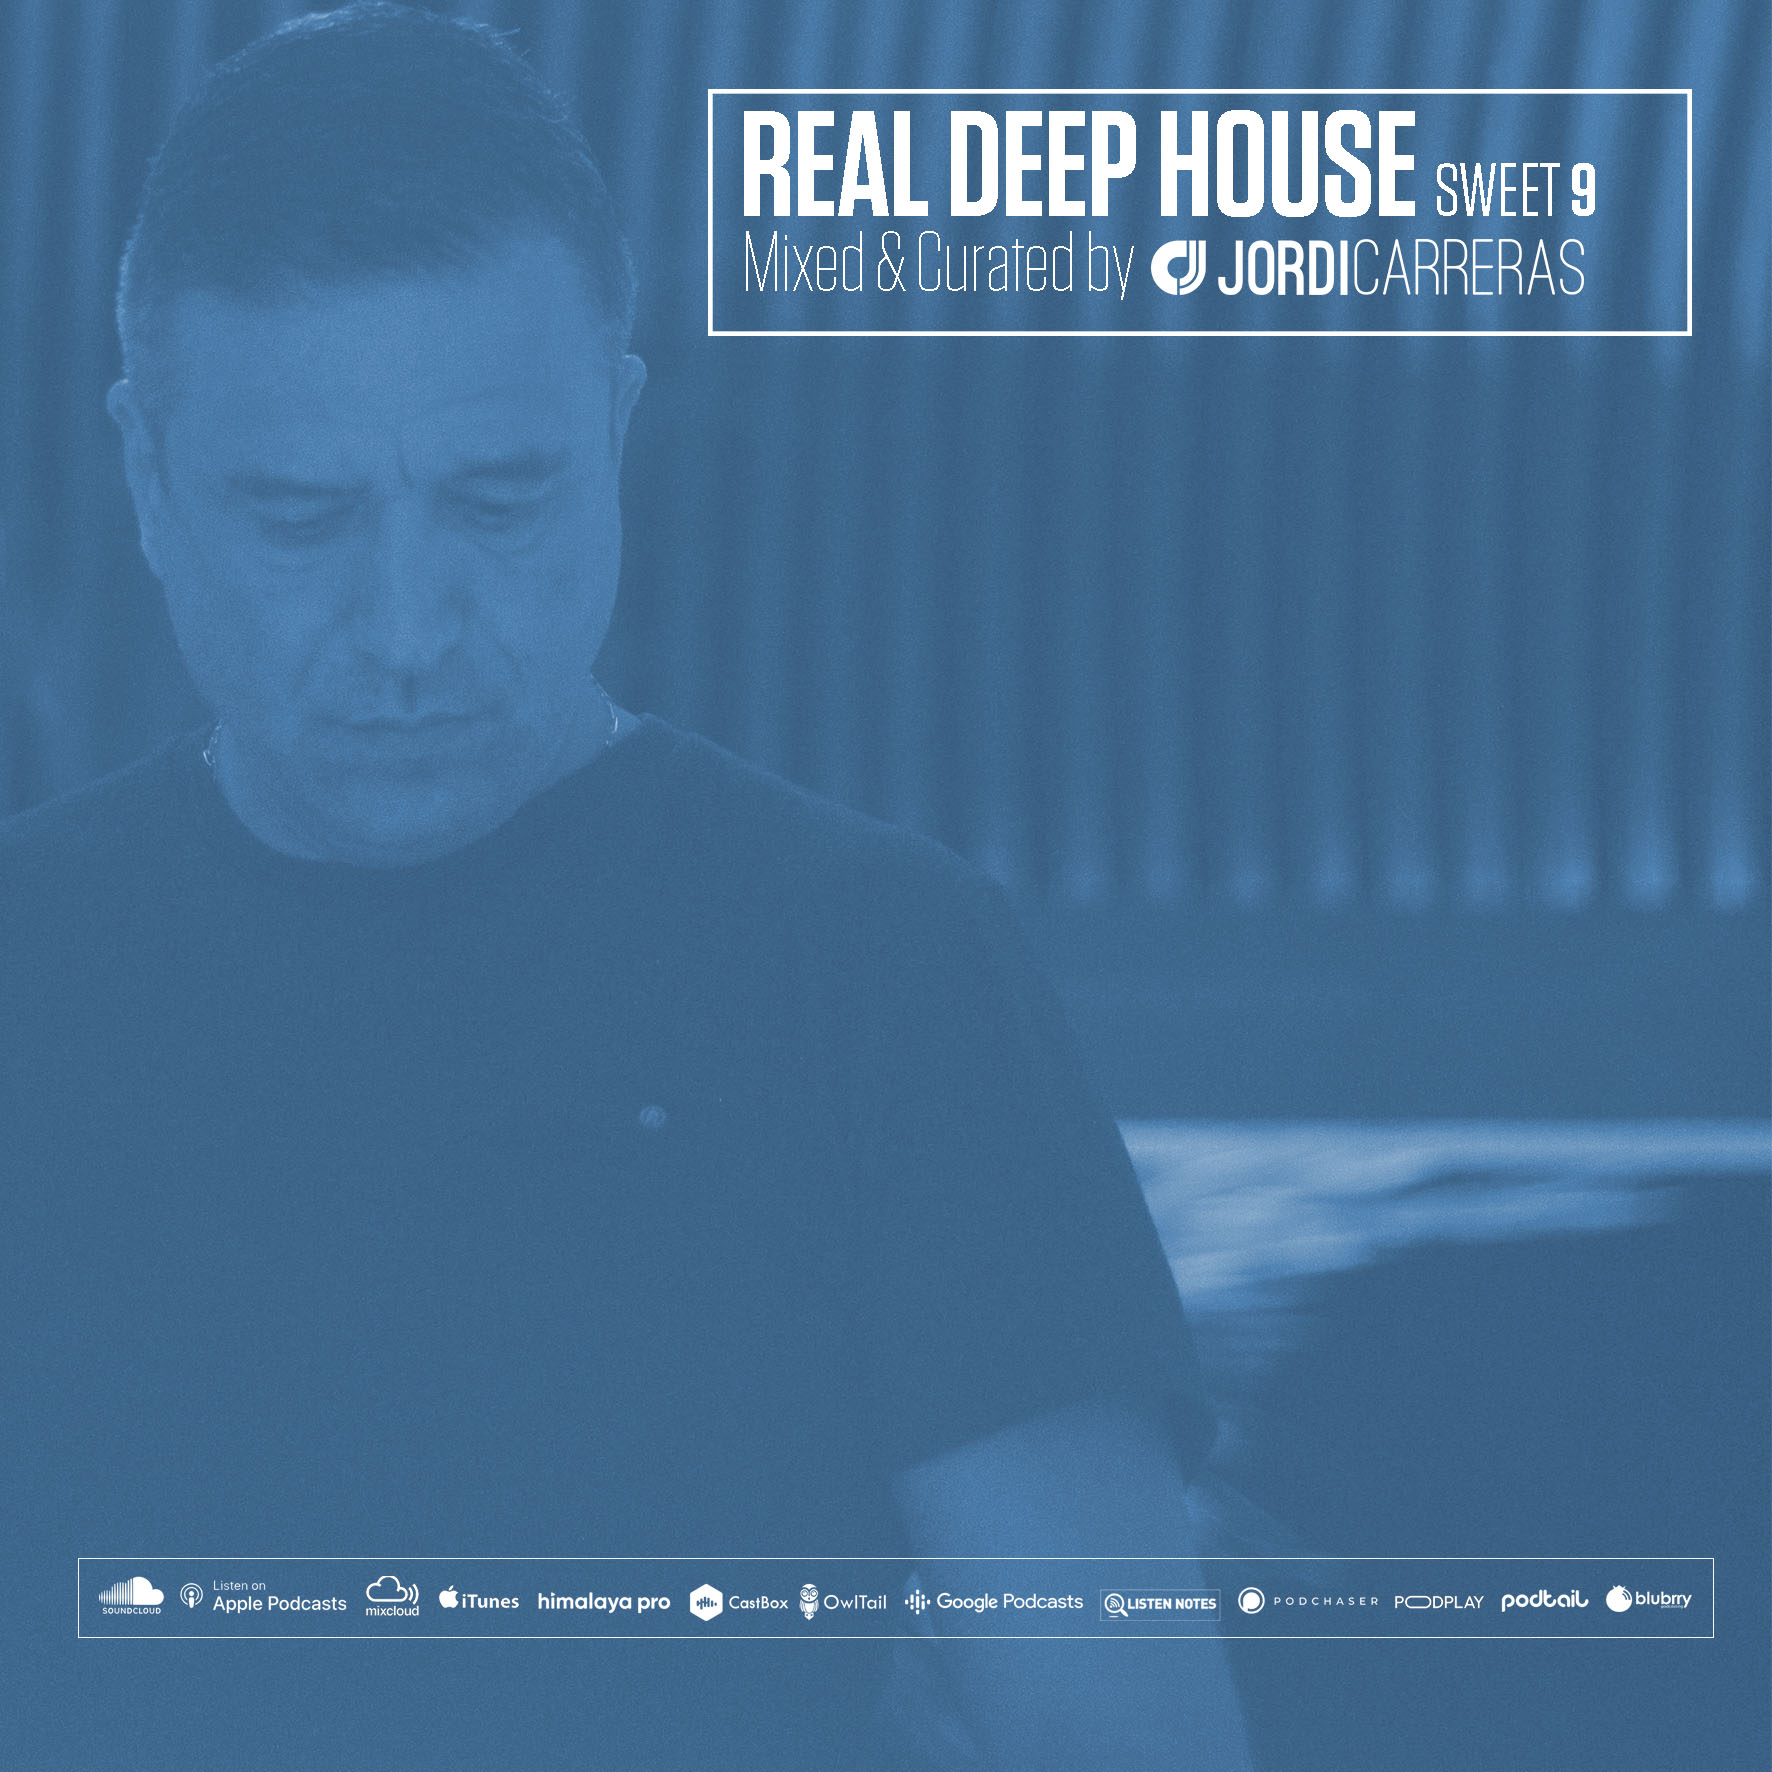 REAL DEEP HOUSE_Sweet_9 - Mixed & Curated by Jordi Carreras